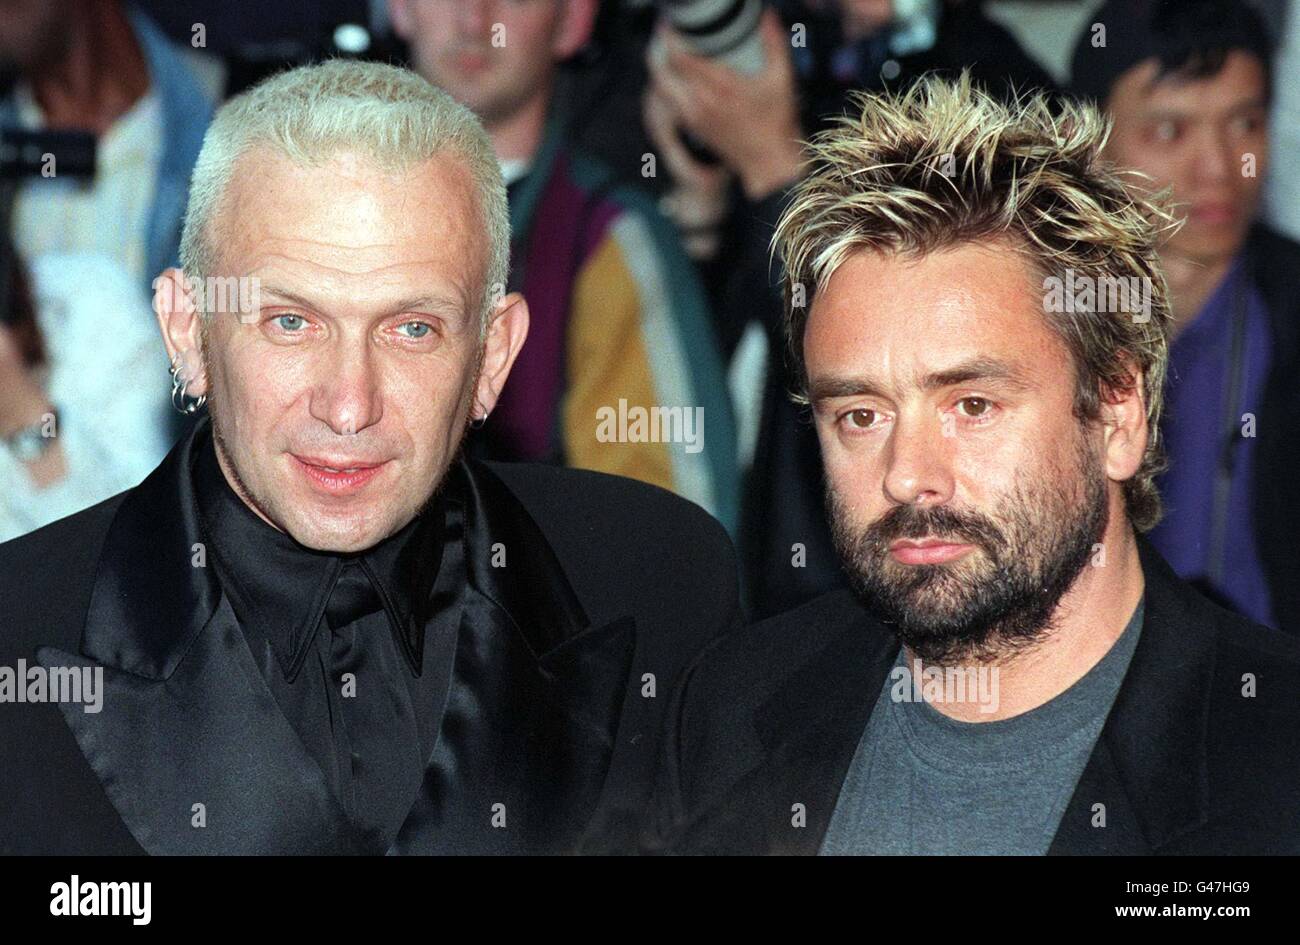 Designer Jean-Paul Gaultier (left) with director Luc Besson at this evening's (Tuesday) London premiere of the sci-fi movie The Fifth Element in Leicester Square. Besson directed the 23rd century fantasy, which stars Bruce Willis, Gary Oldman, Ian Holm and Milla Jovovich, with Gaultier providing futurisitc costumes. Photo by Michael Stephens/PA. Stock Photo